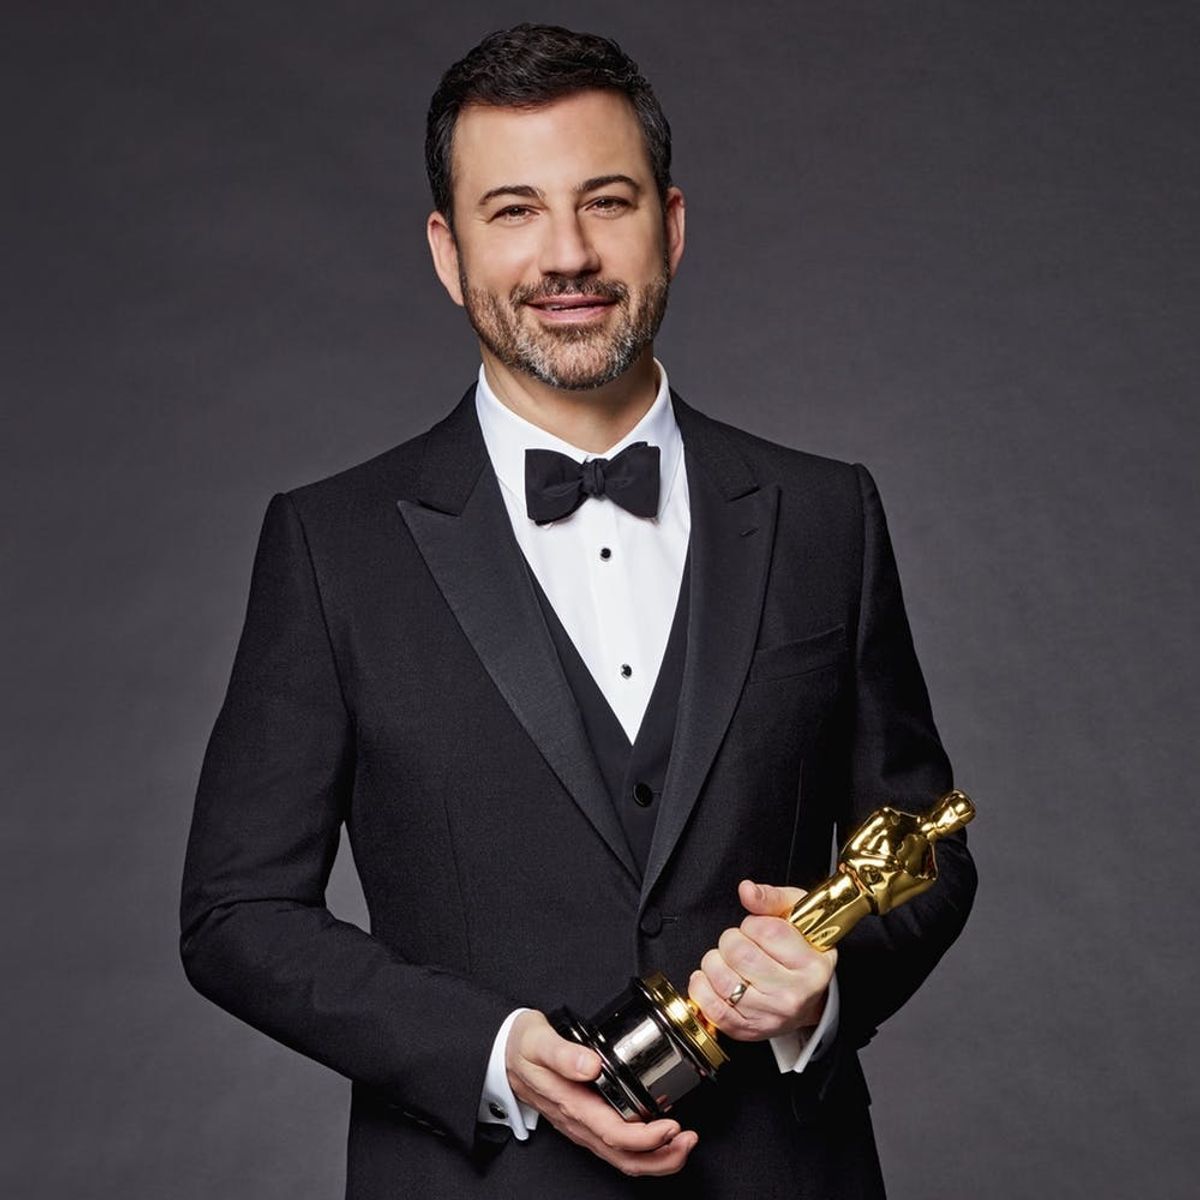 Oscars 2018: Jimmy Kimmel Tackles Envelopegate, Sexual Harassment, and More in Topical Opening Monologue